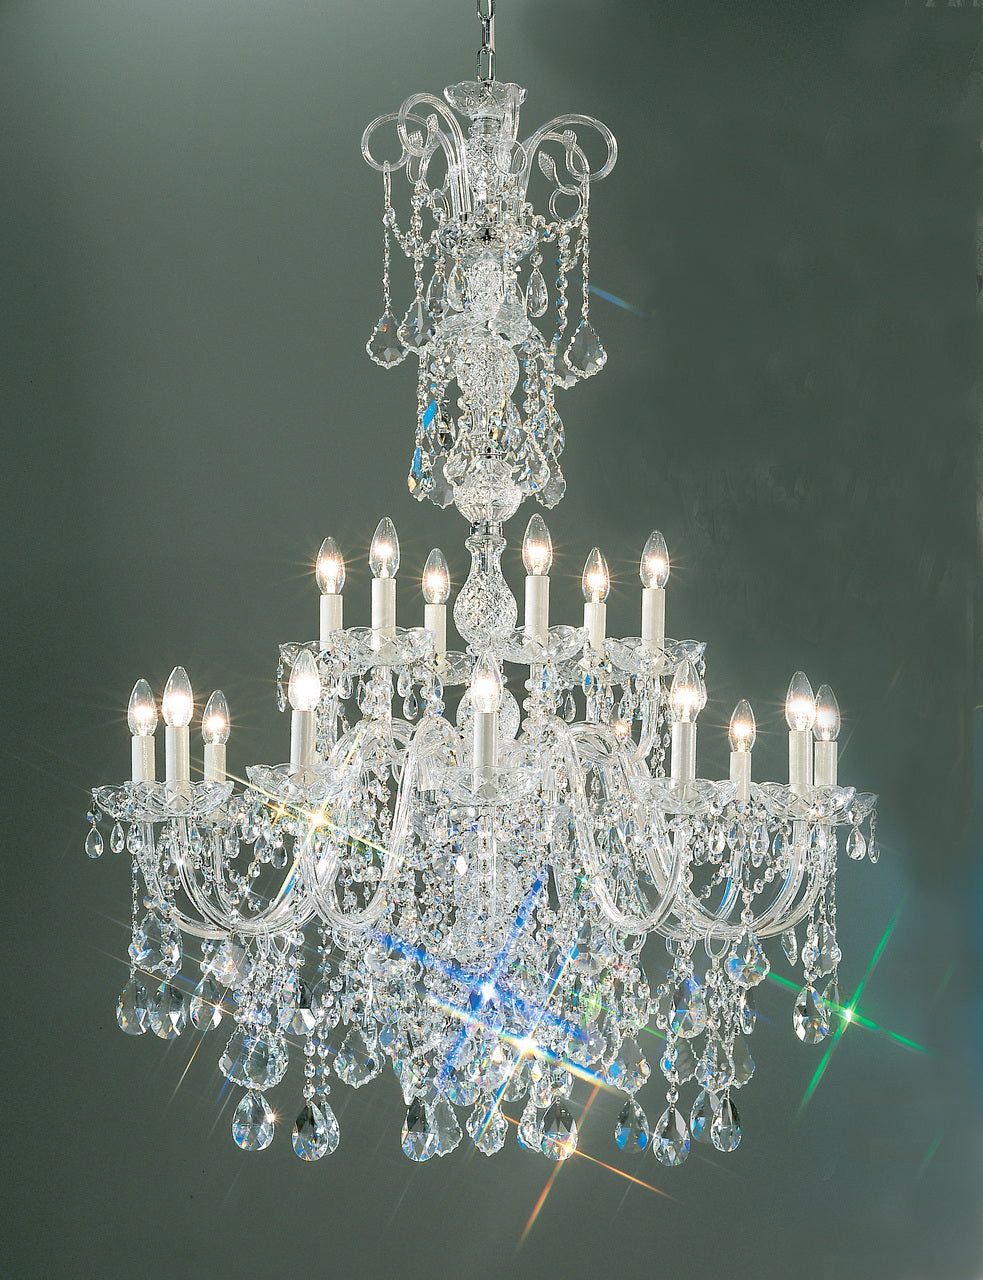 Classic Lighting 8263 CH S Bohemia Crystal/Glass Chandelier in Chrome (Imported from Italy)